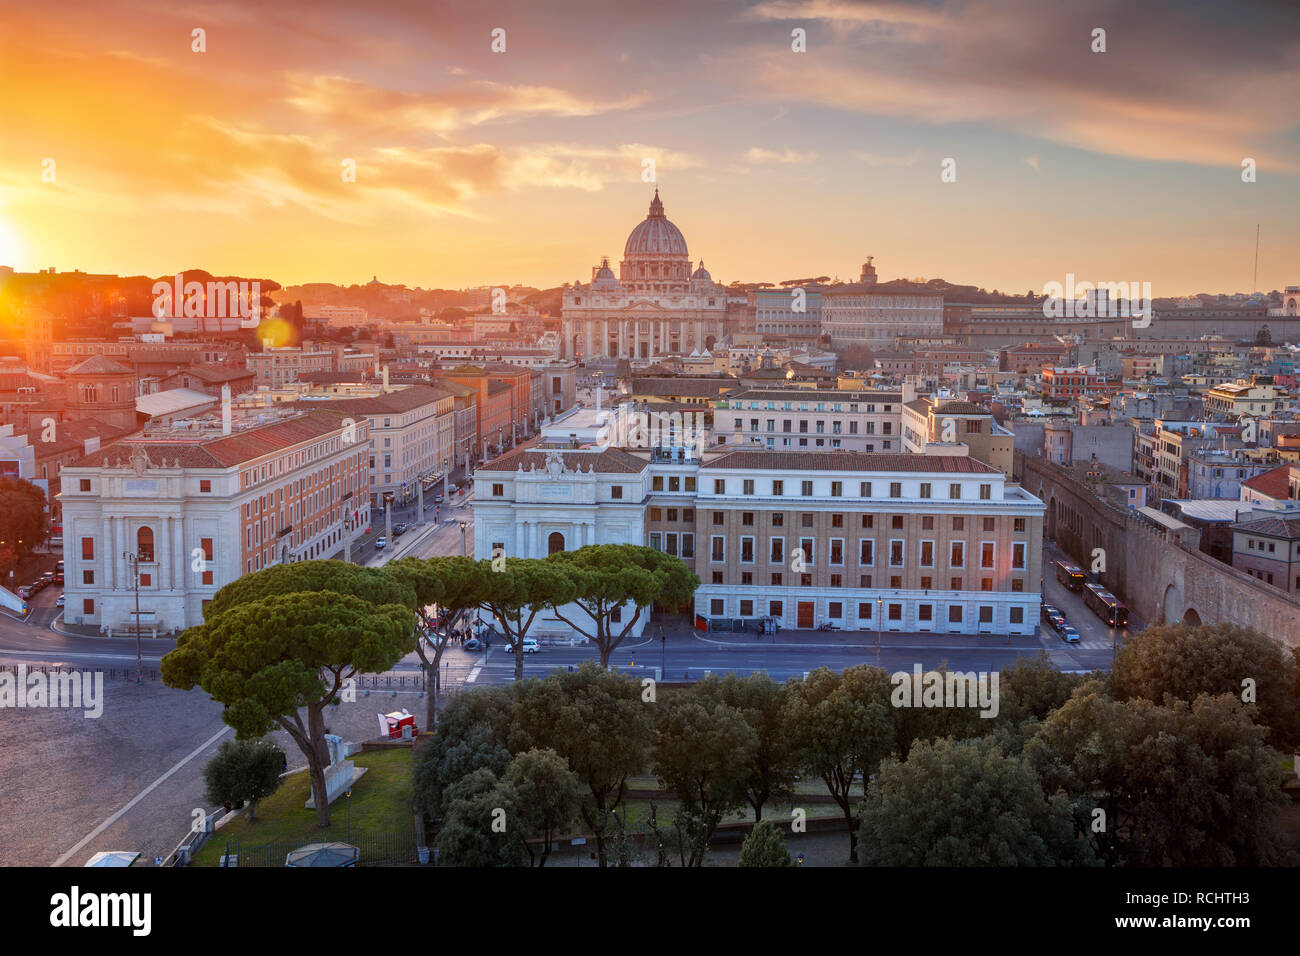 Rome, Vatican City. Aerial cityscape image of Vatican City with the Saint Peter Basilica, Rome, Italy during beautiful sunset. Stock Photo